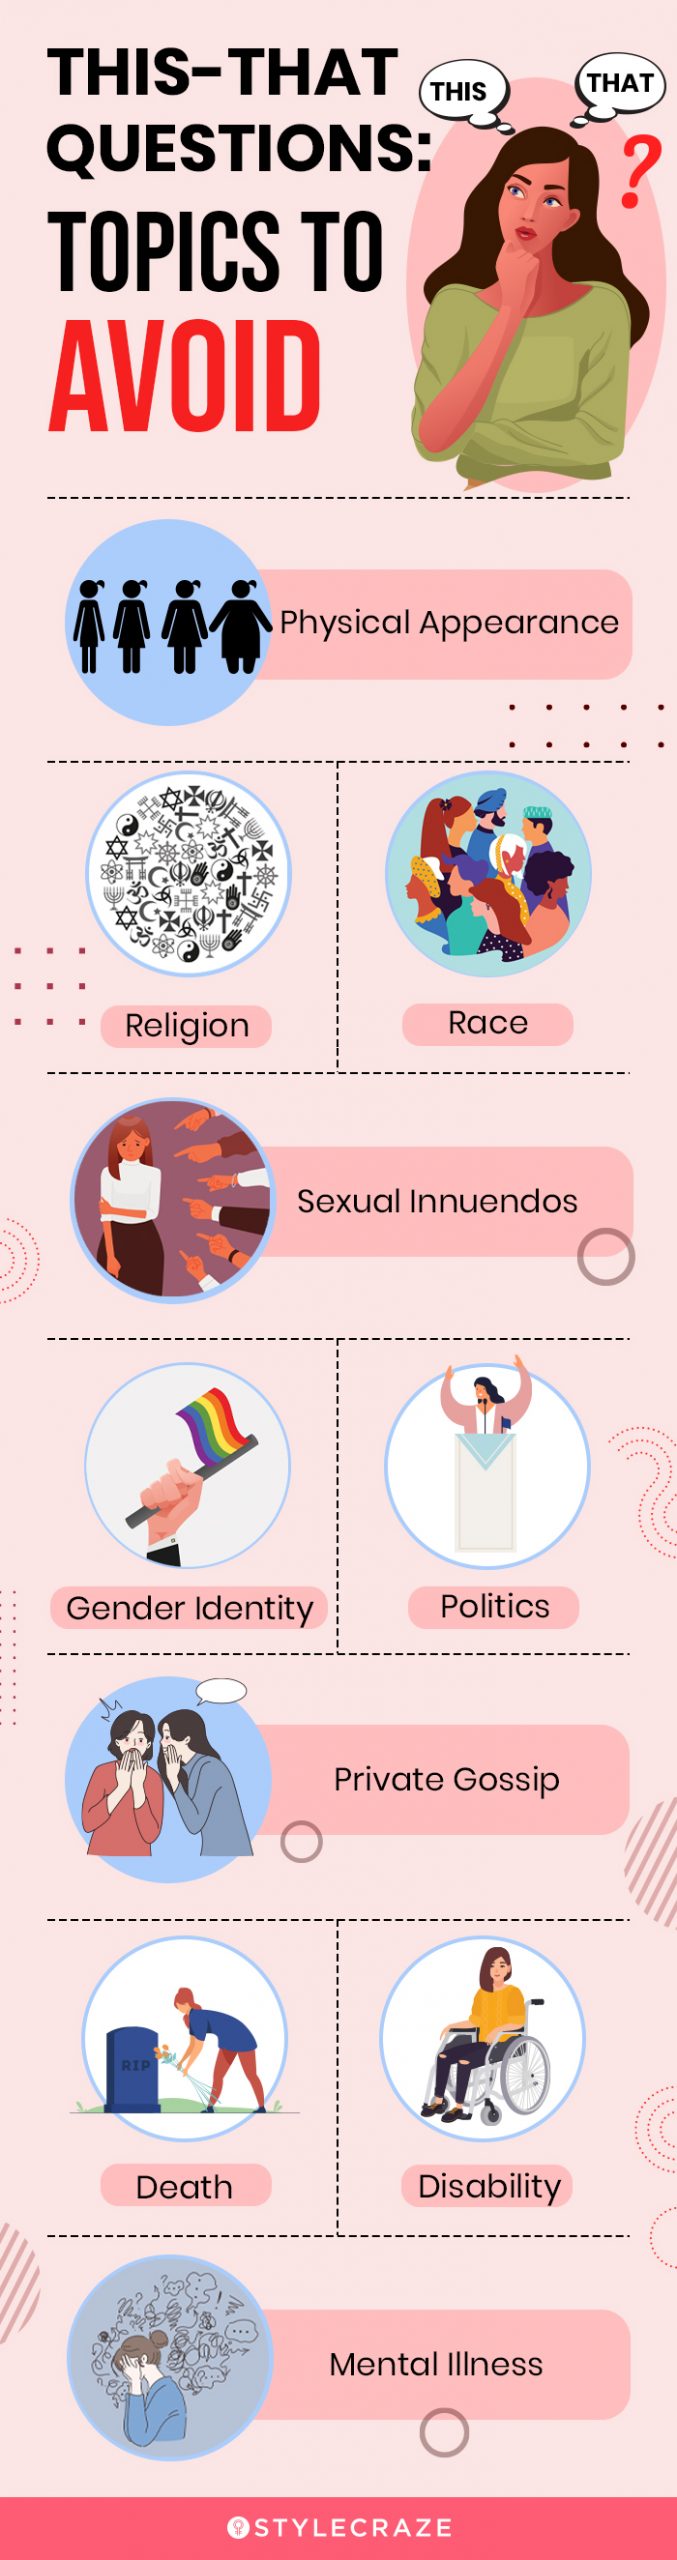 this that questions topics to avoid (infographic)